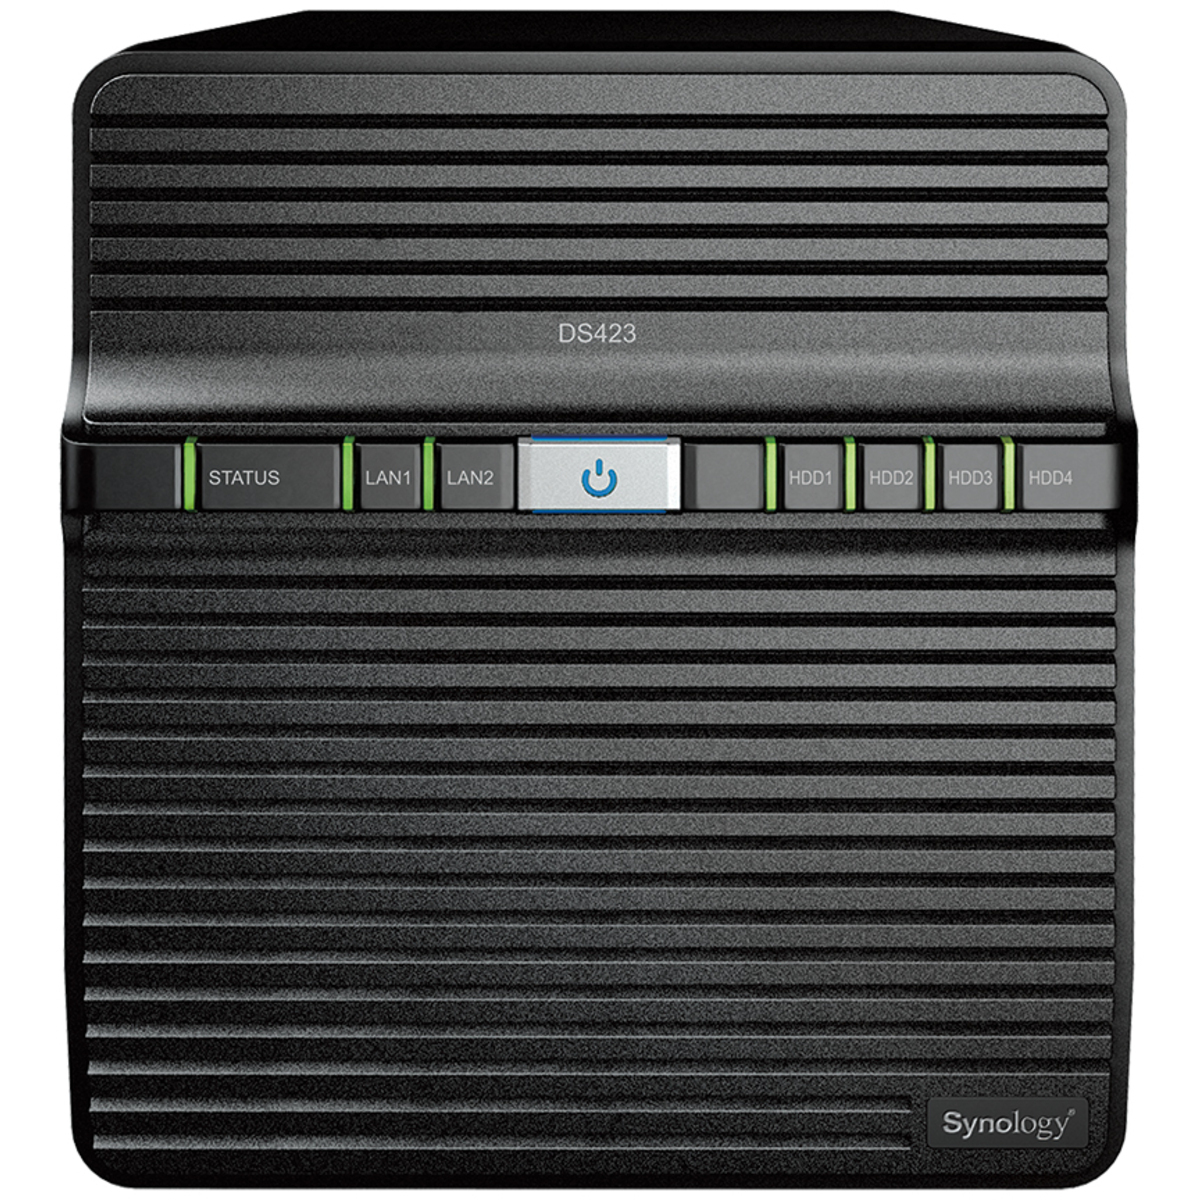 Synology DiskStation DS423 36tb 4-Bay Desktop Personal / Basic Home / Small Office NAS - Network Attached Storage Device 3x12tb Western Digital Ultrastar DC HC520 HUH721212ALE600 3.5 7200rpm SATA 6Gb/s HDD ENTERPRISE Class Drives Installed - Burn-In Tested DiskStation DS423